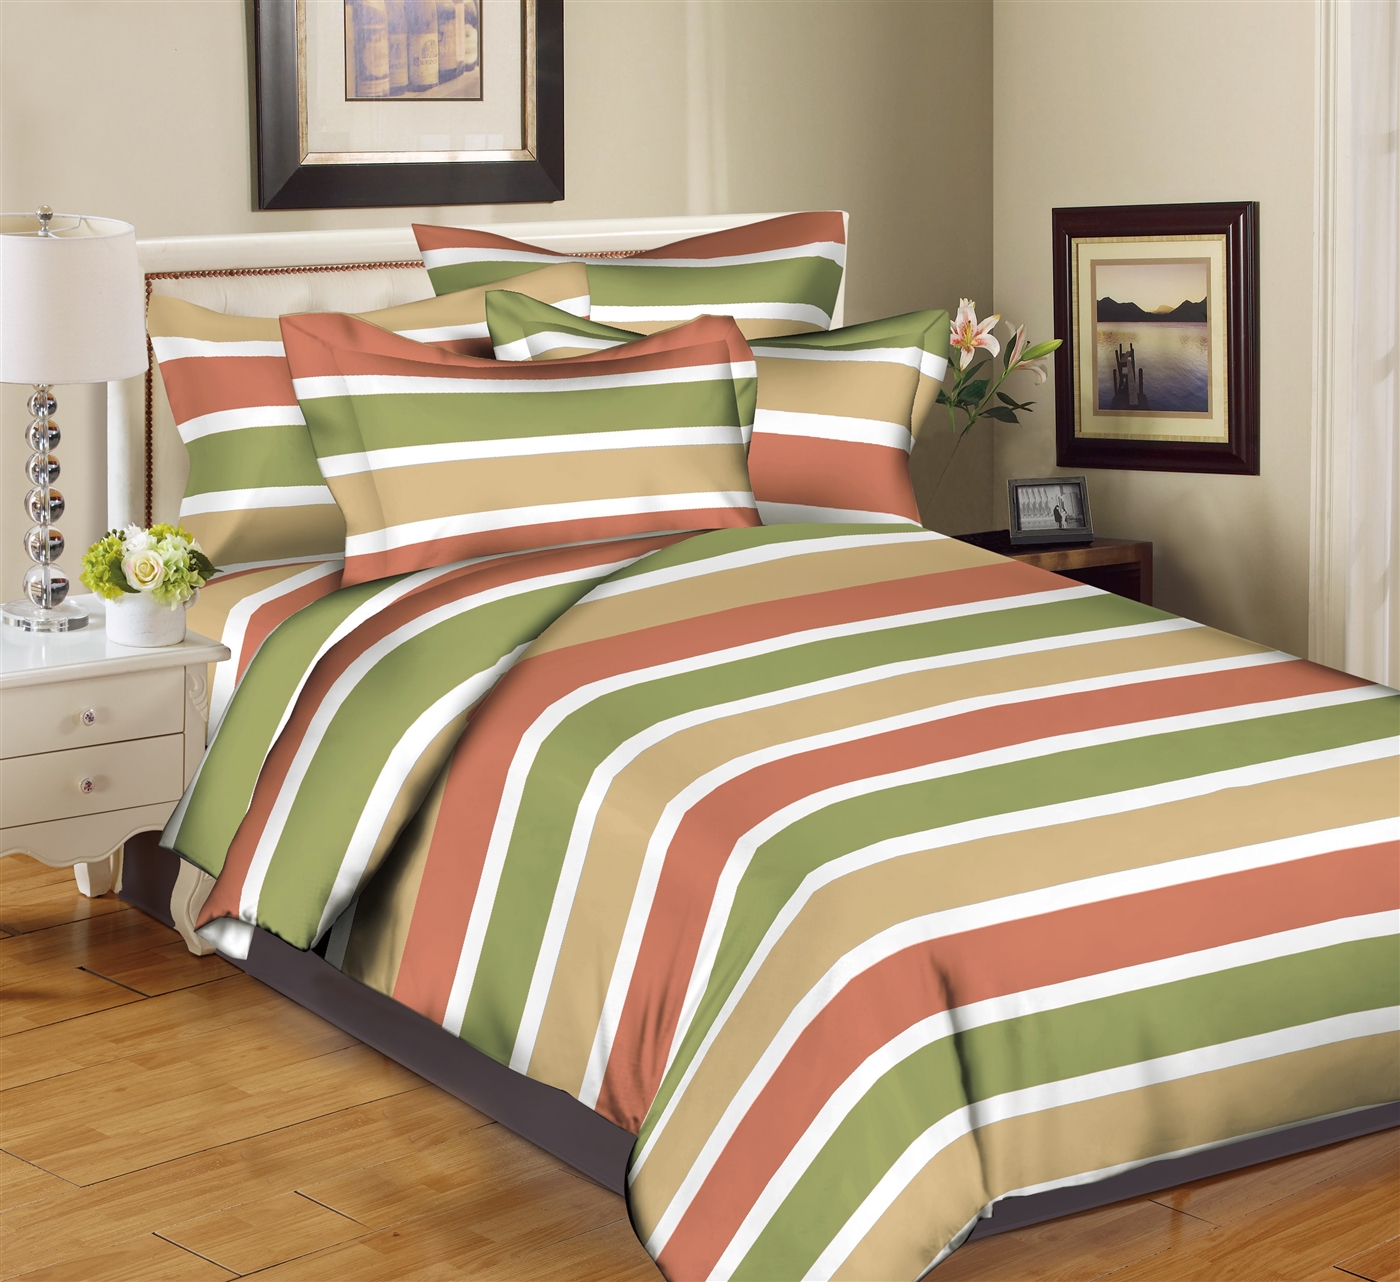 Better Bed Collection: Coral Stripes 8PC Bedding Sets - 200 Thread Count